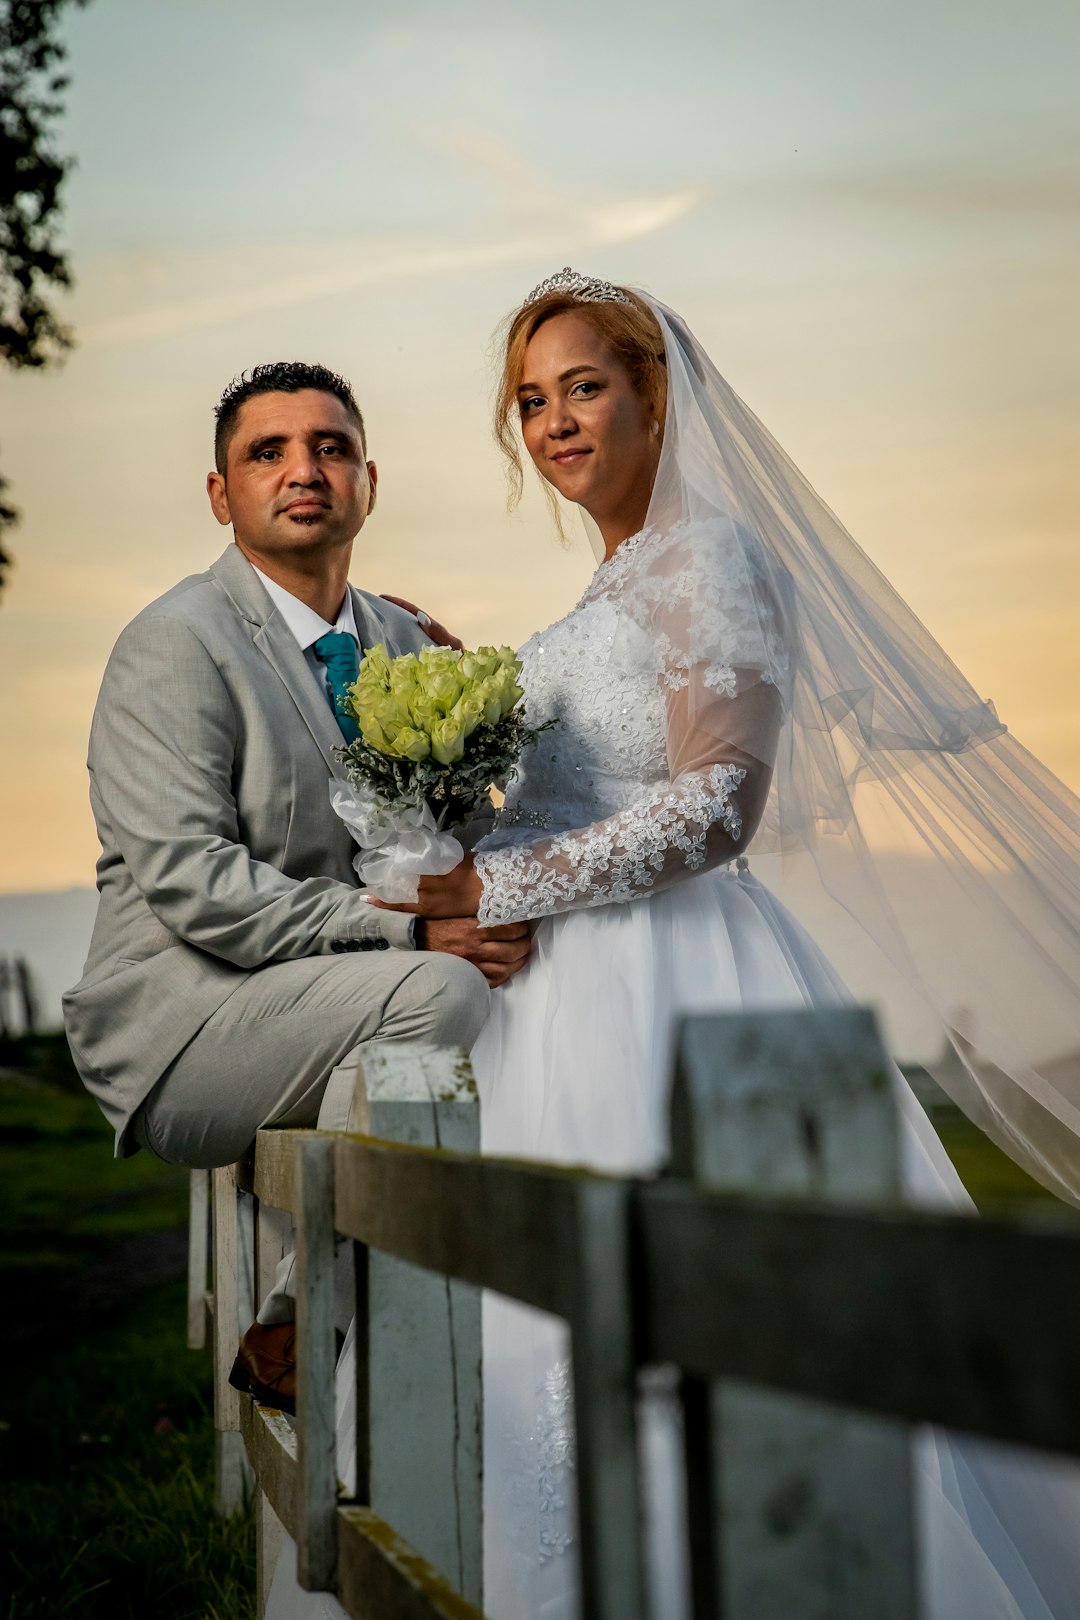 man in gray suit jacket holding bouquet of flowers beside woman in white wedding gown